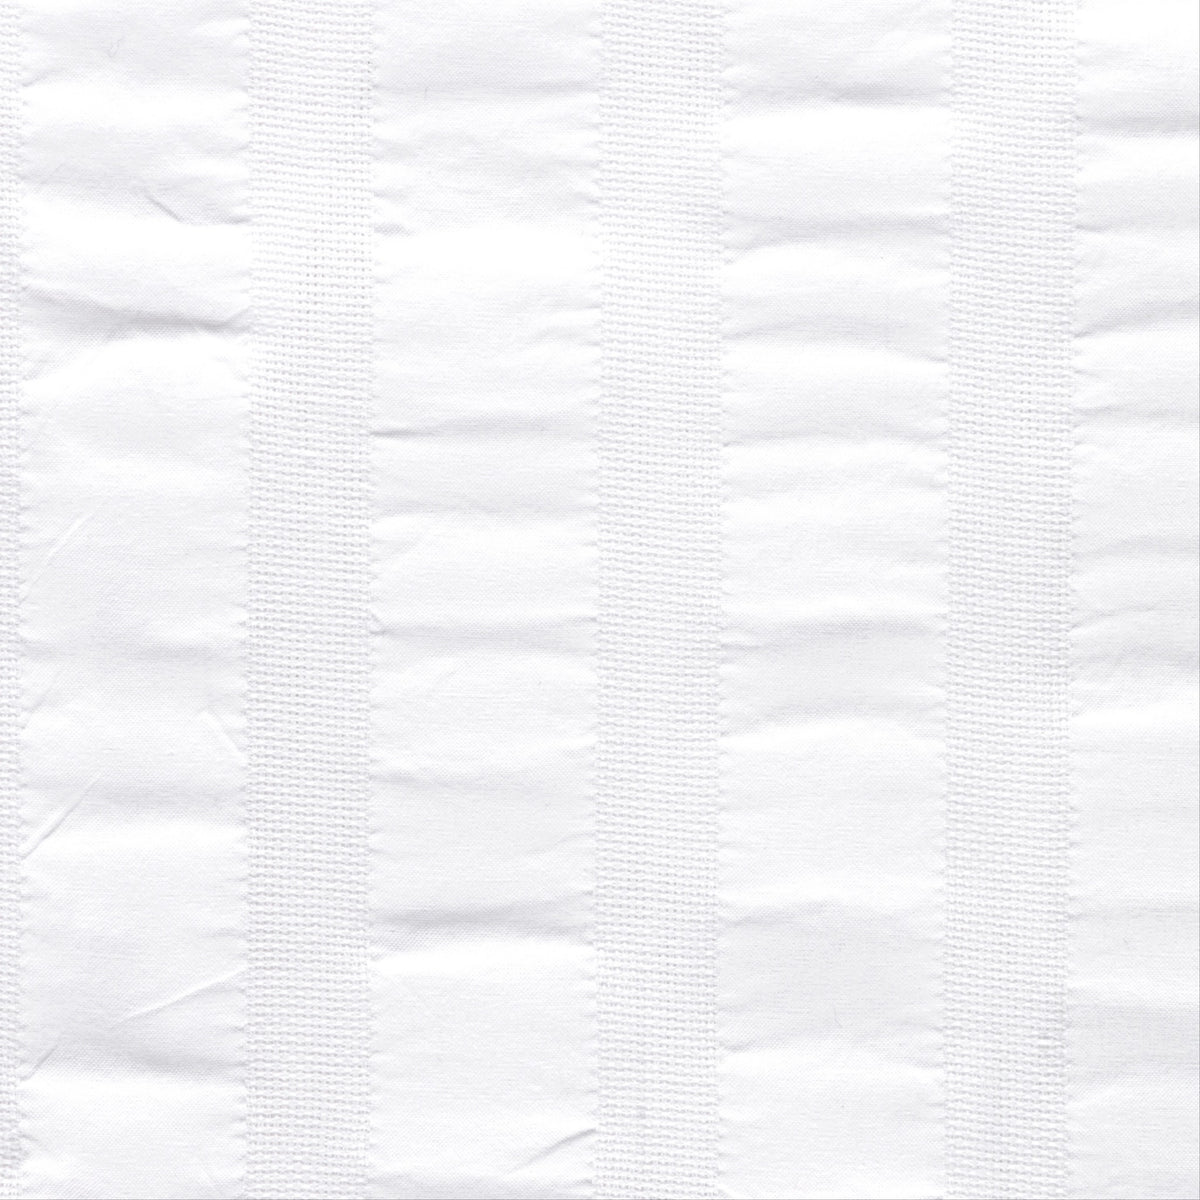 Swatch Sample of Matouk Panama Bedding in Color White